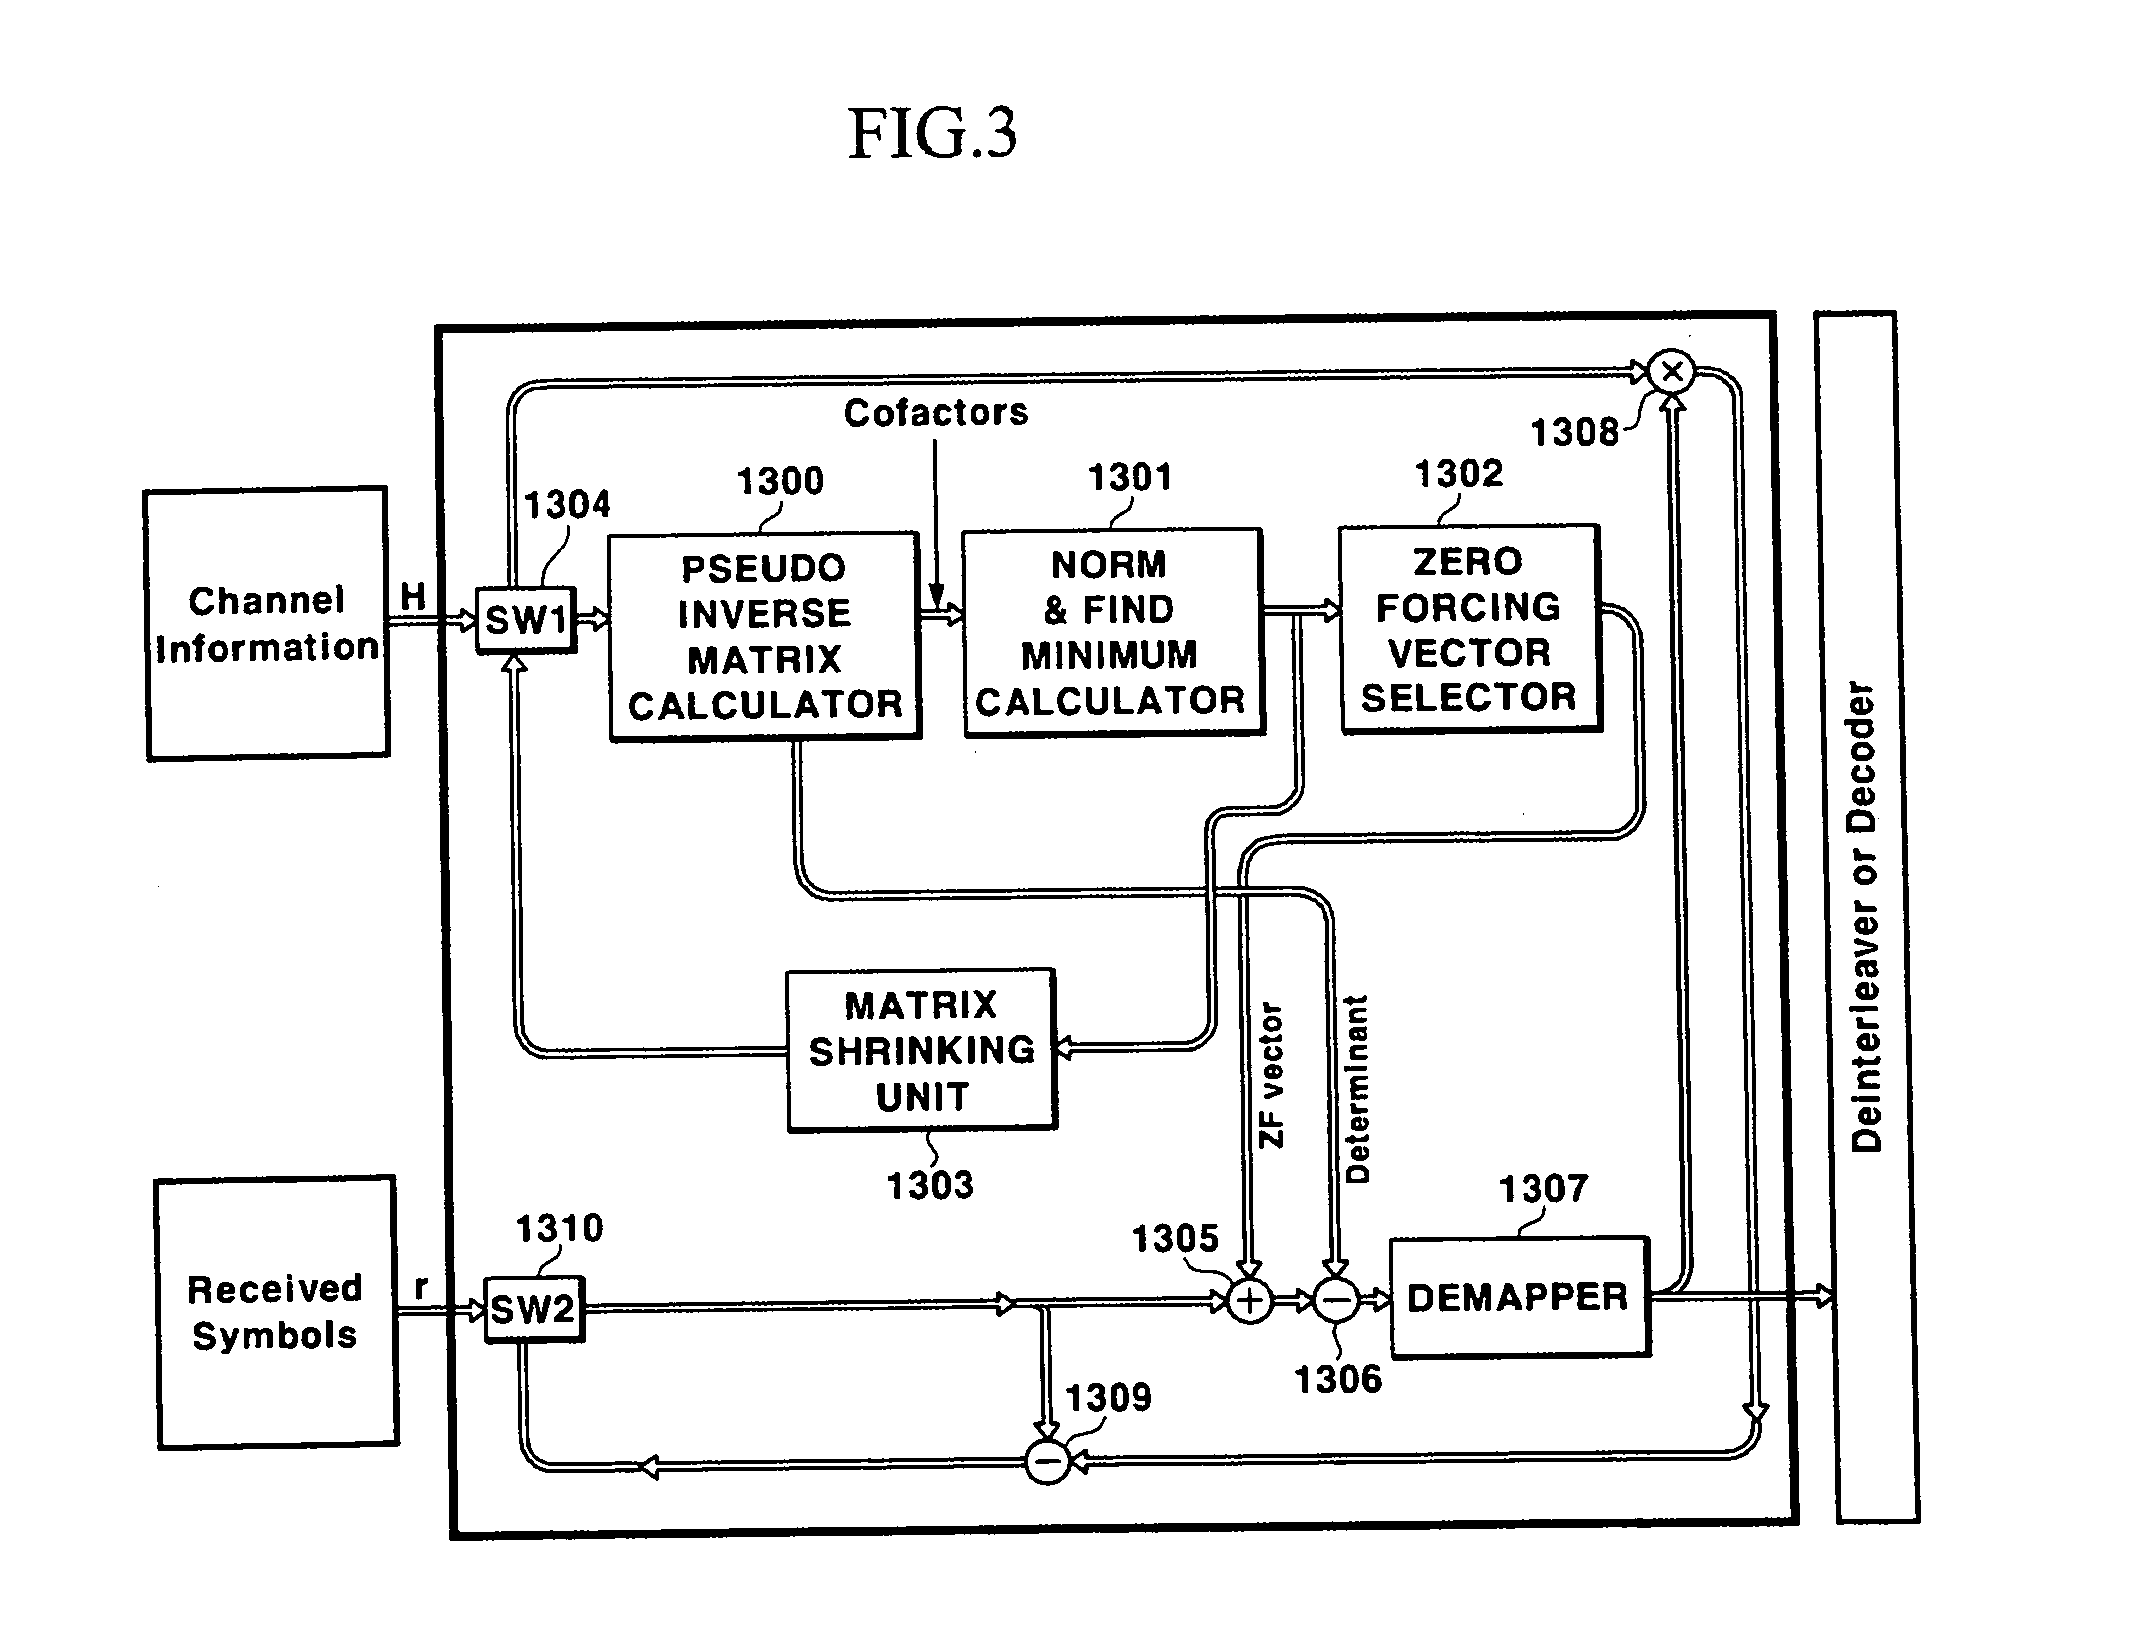 Processing device for a pseudo inverse matrix and V-BLAST system